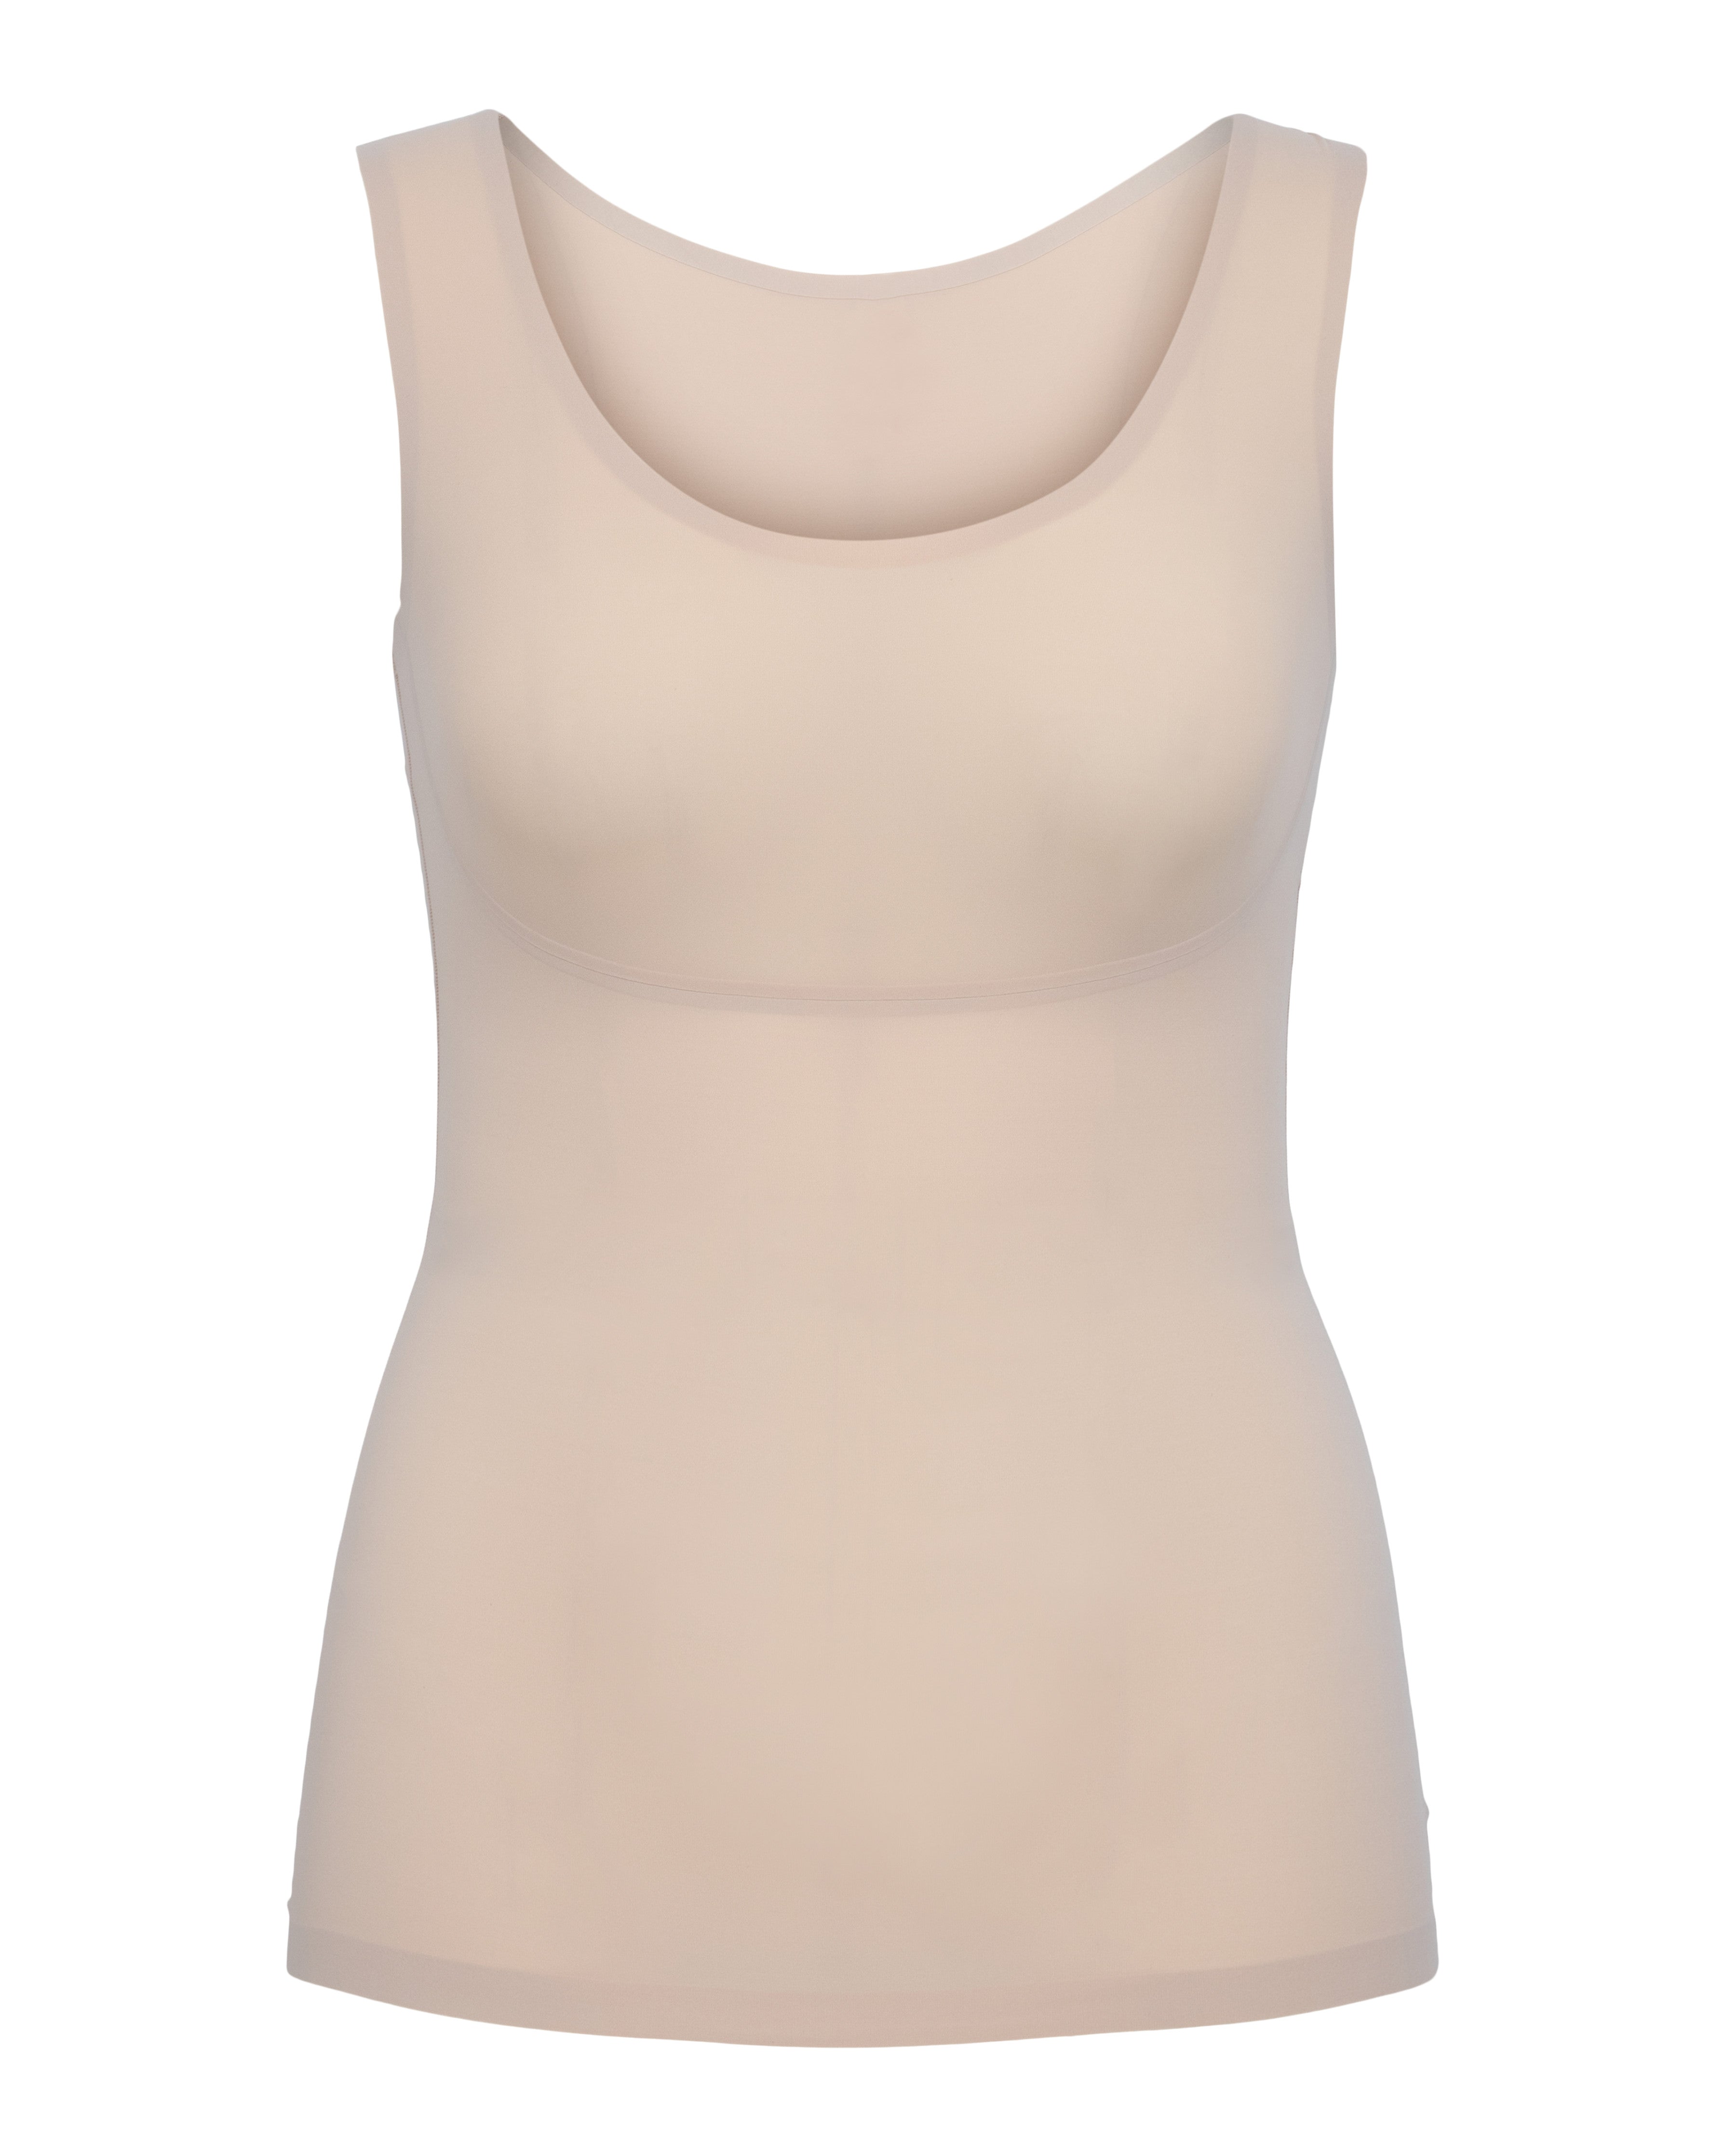 Assets By Spanx Women's Thintuition Shaping Tank Top - Beige M : Target